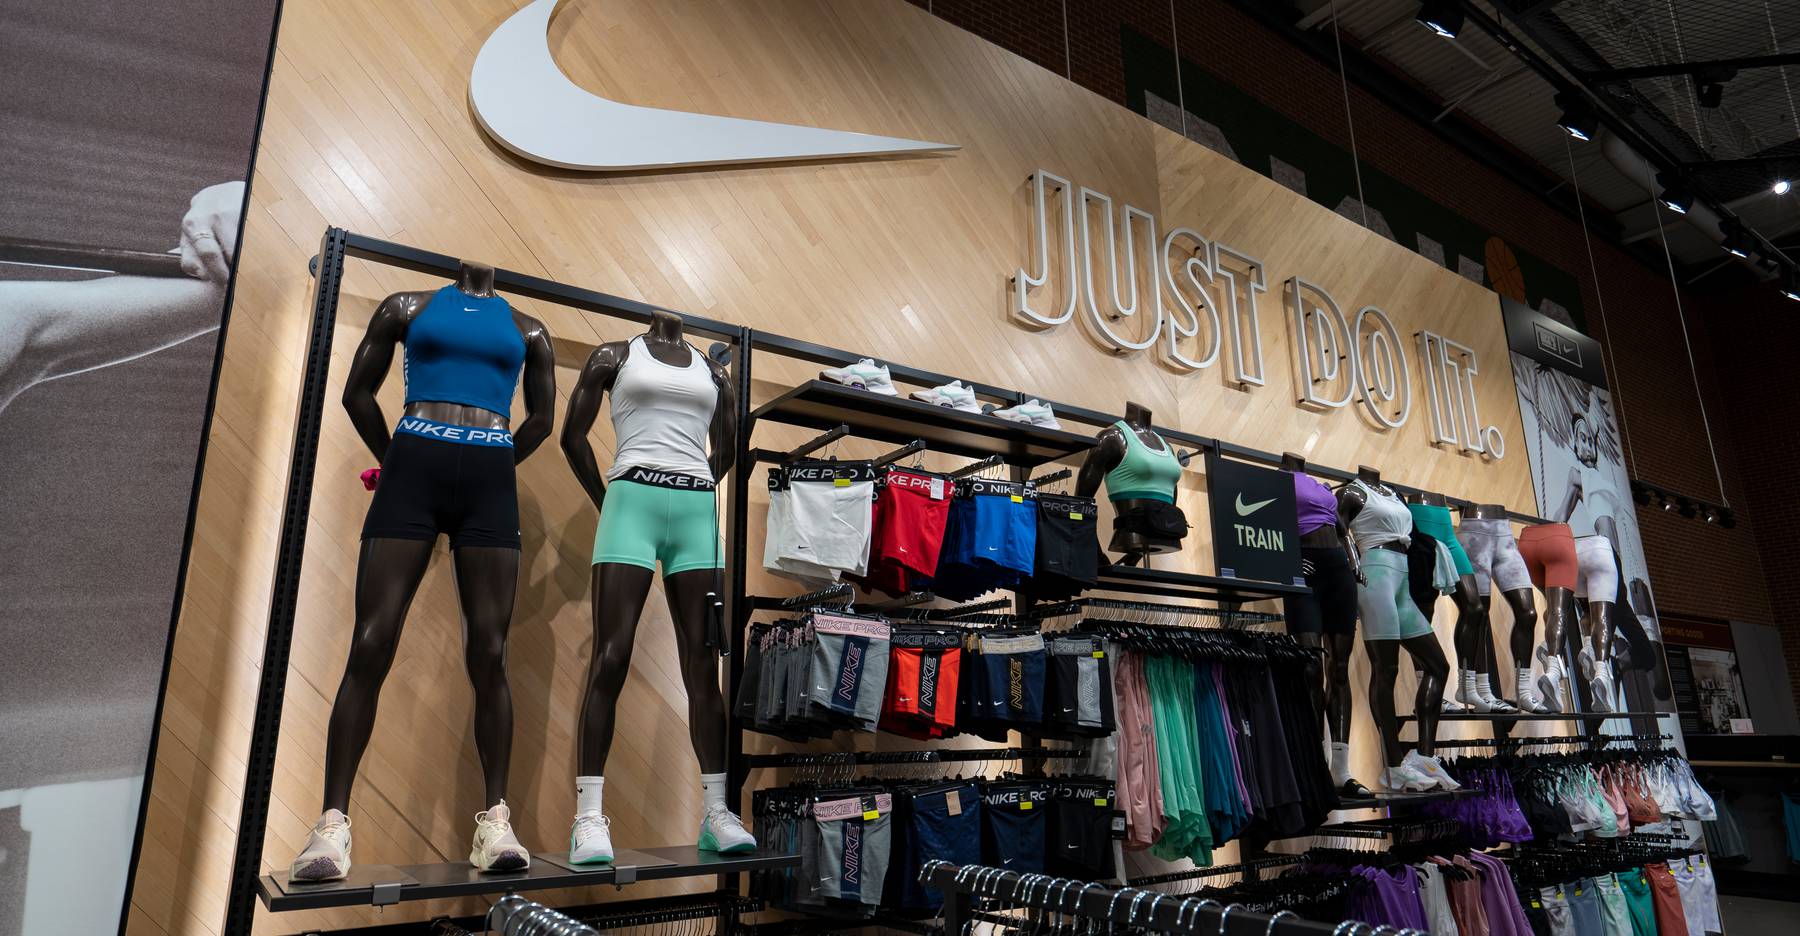 Nike products on display at a Dick's Sporting Goods store in Oregon.